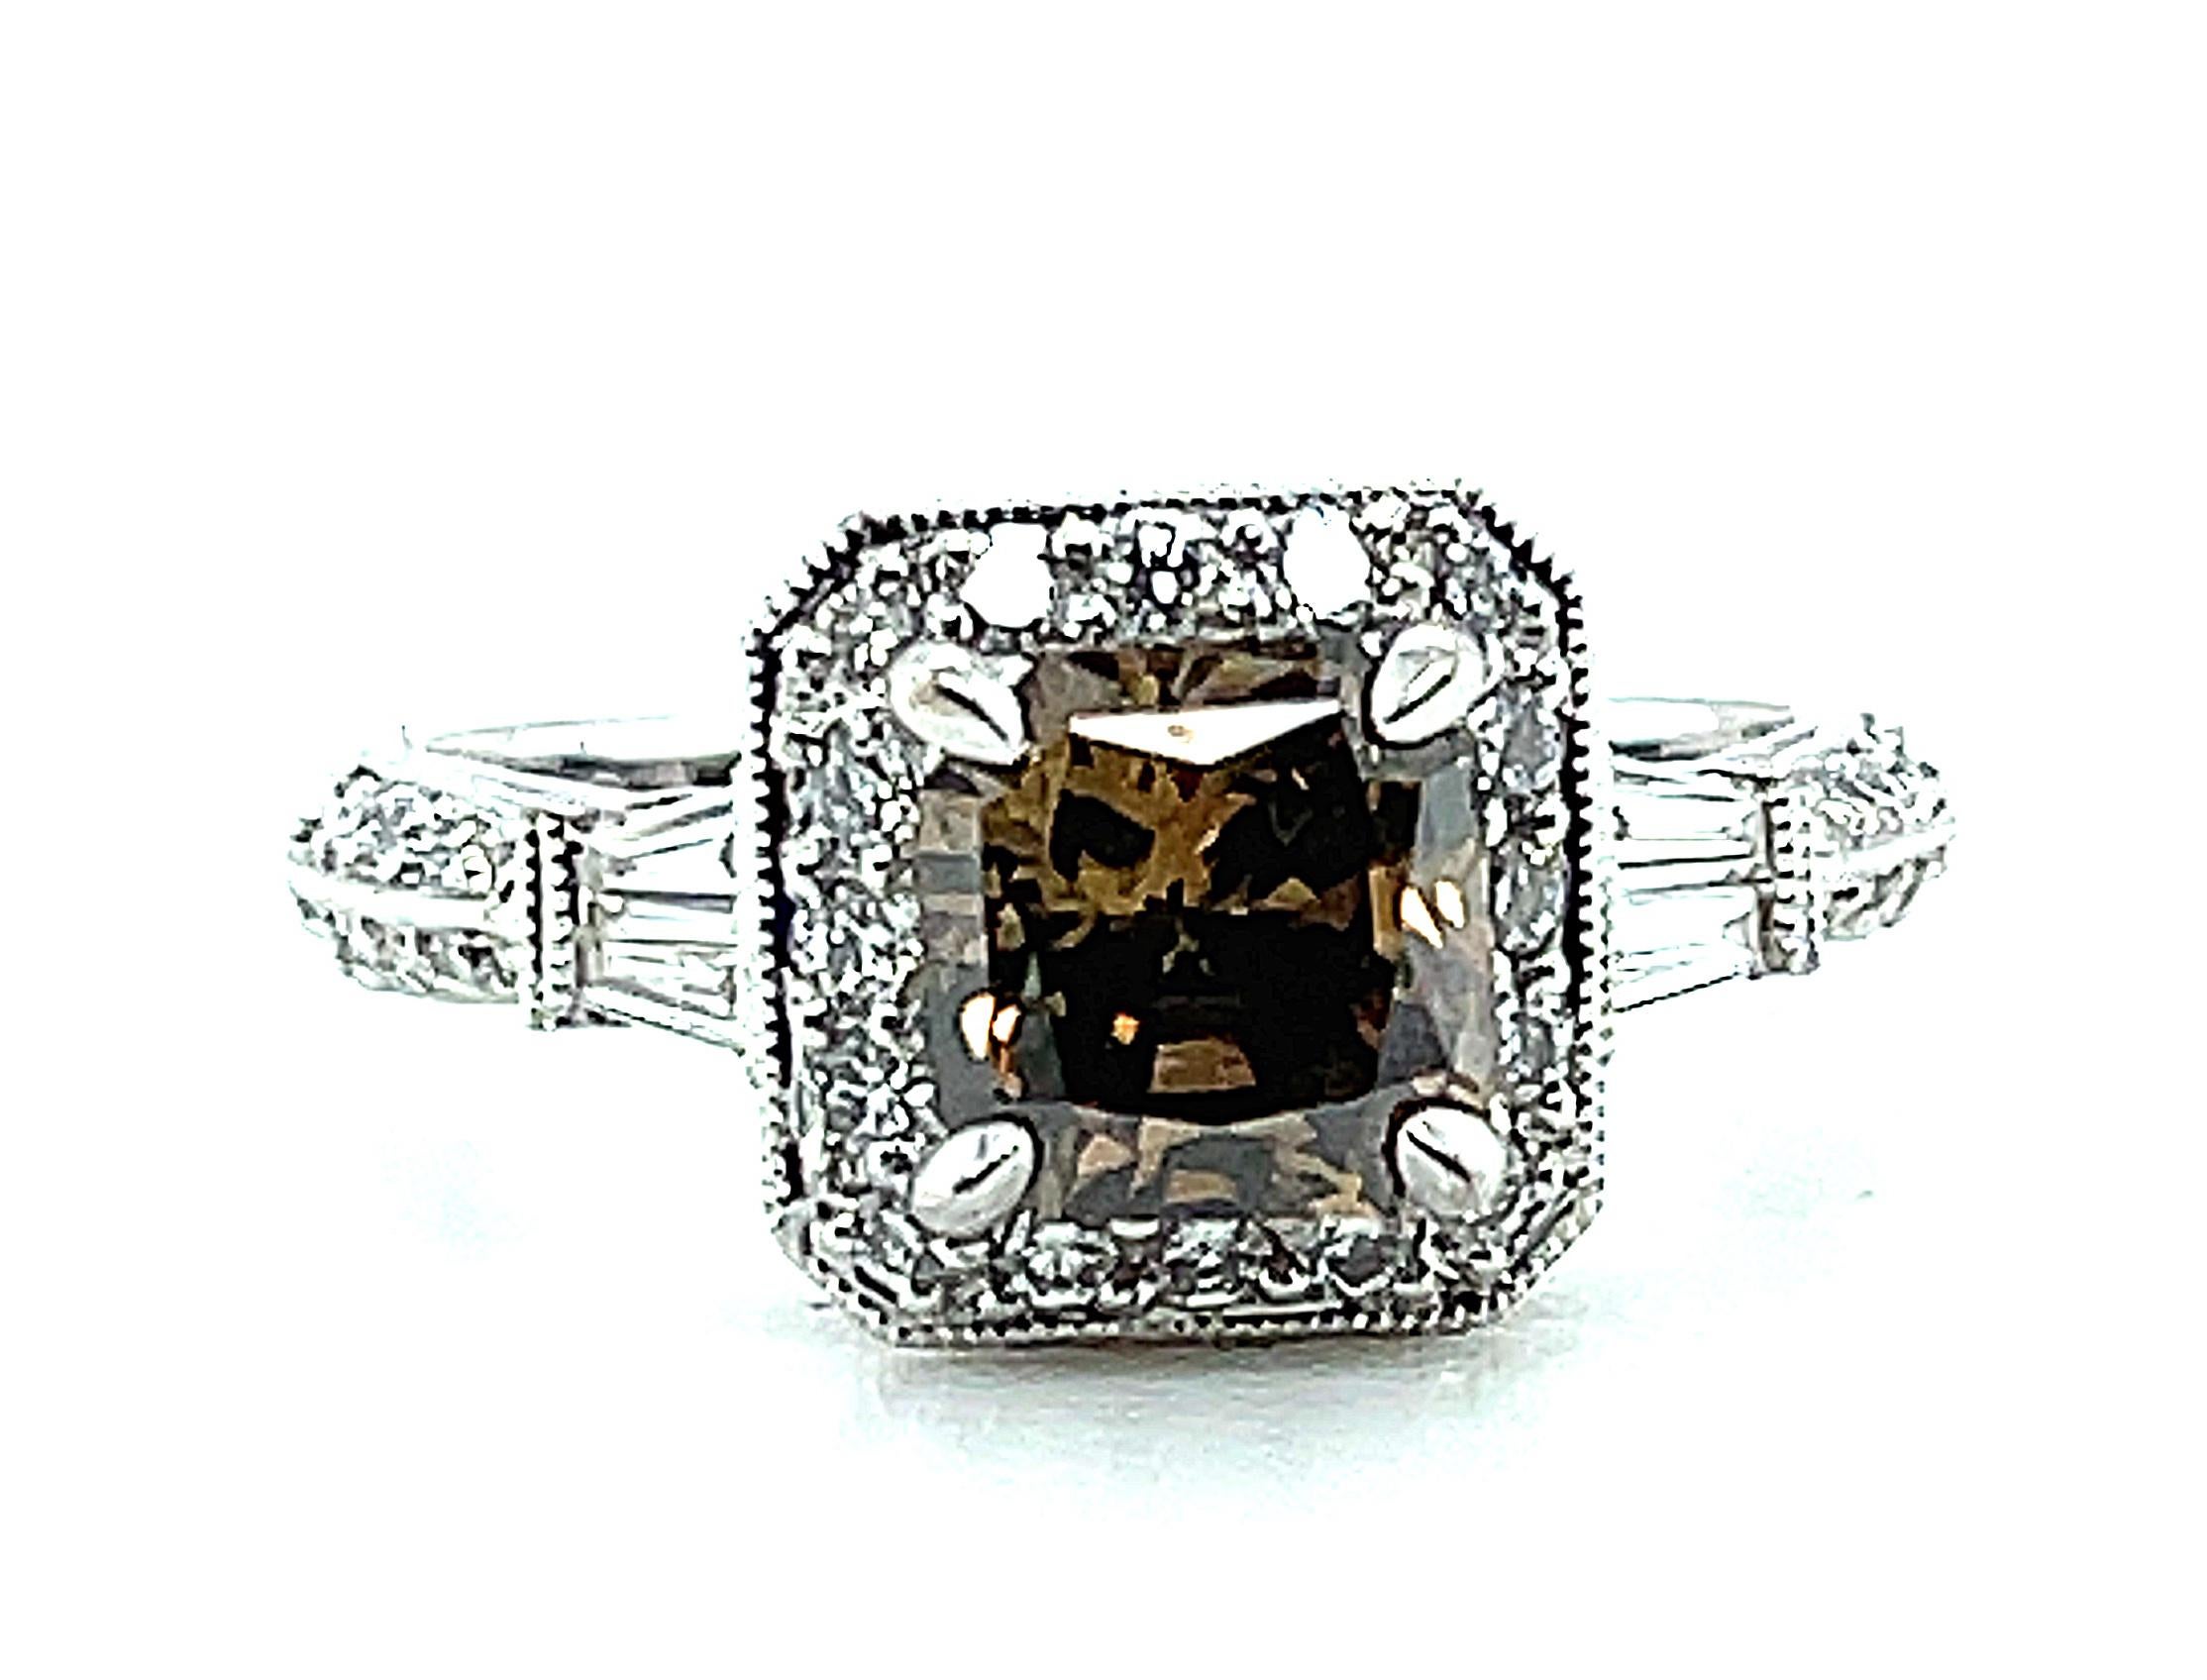 This antique style engagement ring features a brilliant 1.19 carat radiant cut coffee color diamond set in 18k white gold. The dazzling center stone has excellent clarity and life and is surrounded by a halo of sparkling white diamonds. The white